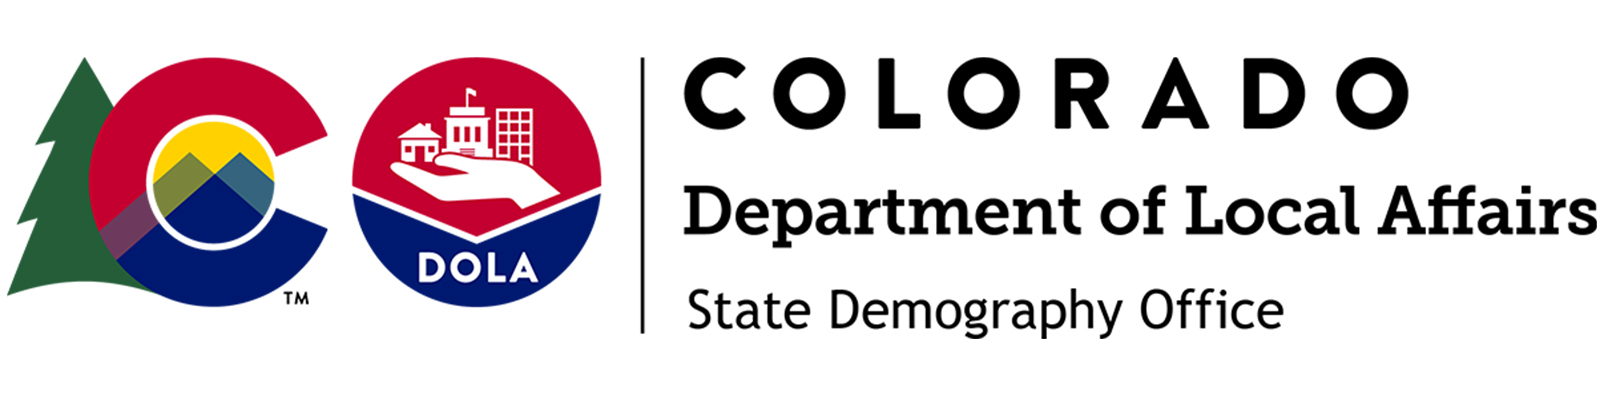 Colorado Department of Local Affairs State Demography Office